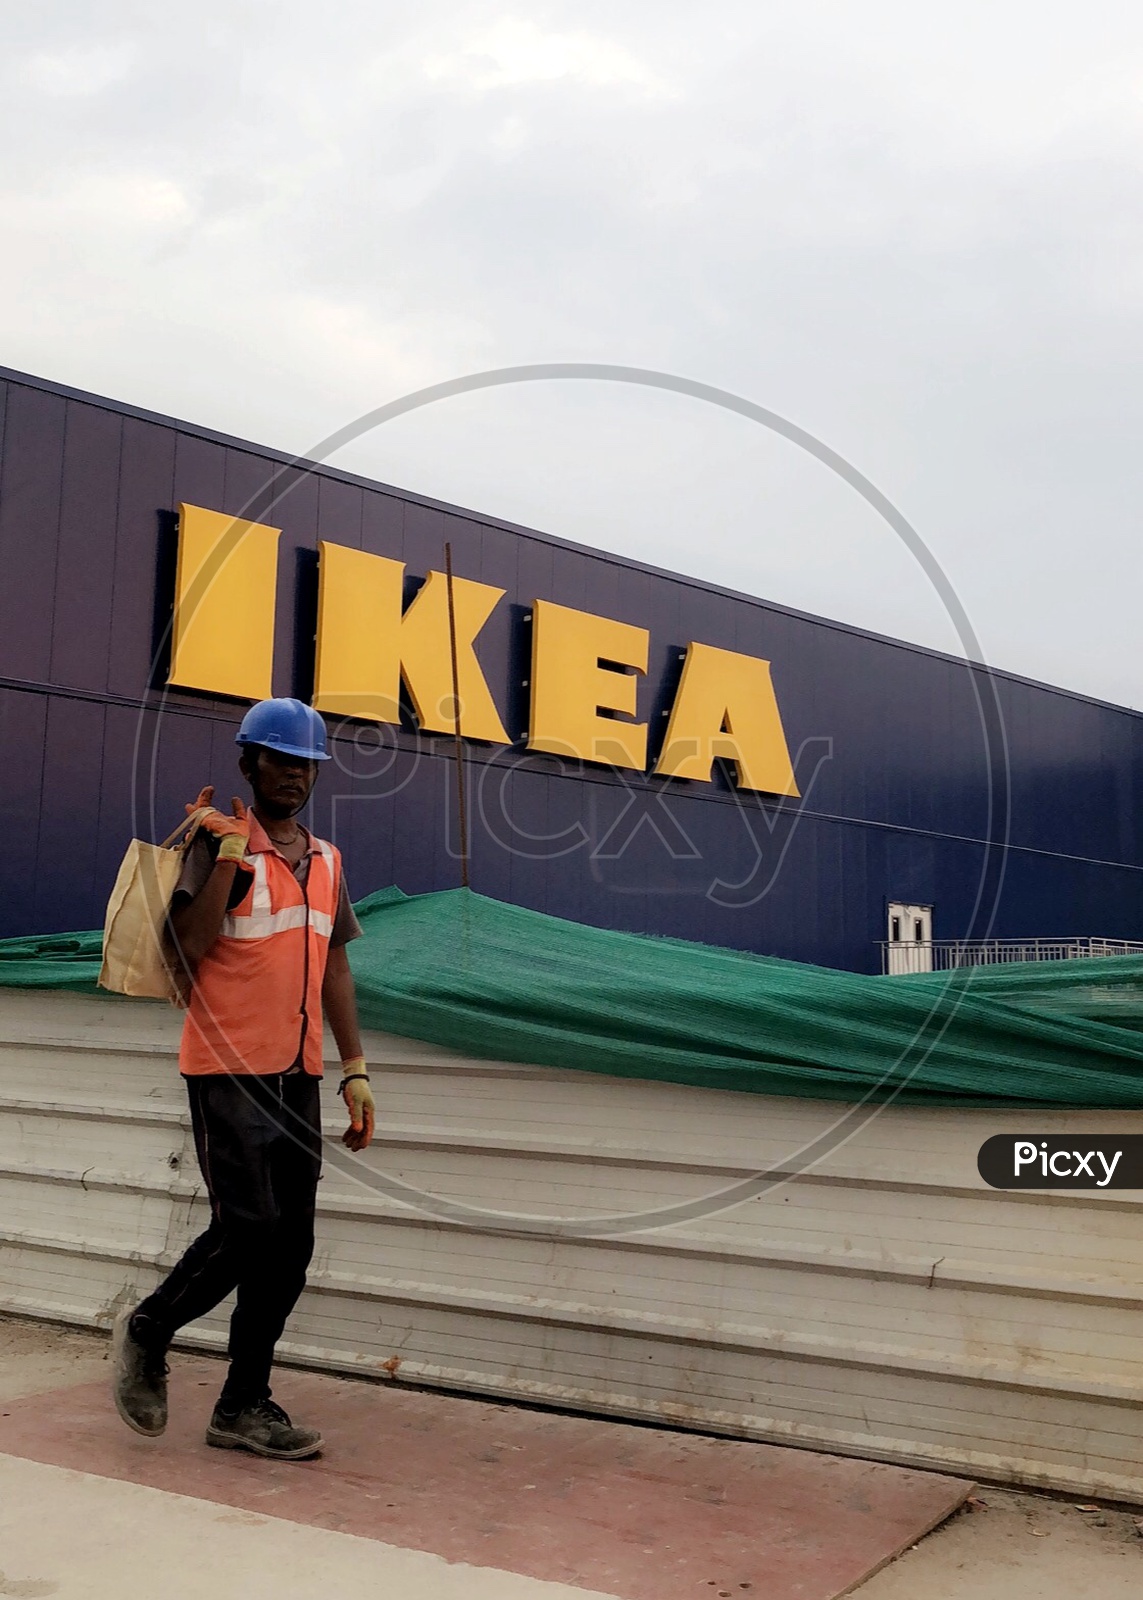 IKEA store in Hyderabad India getting ready